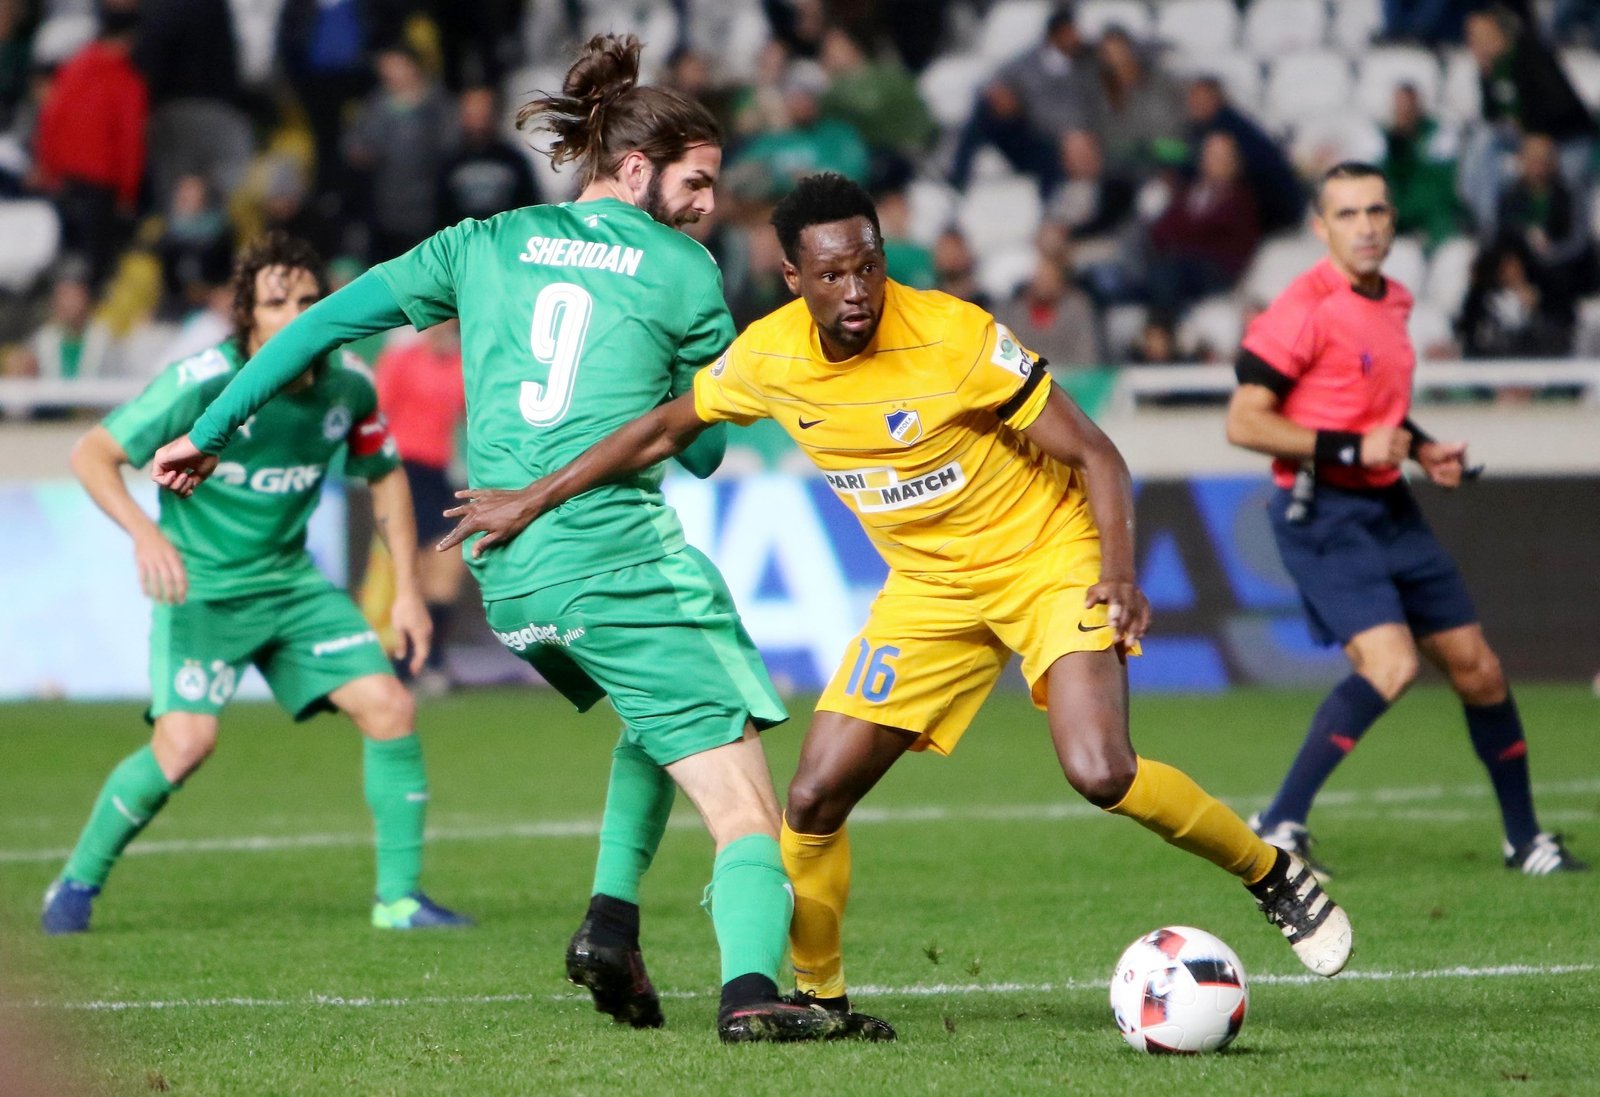 Image - APOEL FC's Vinicius Oliveira Franco (R) fights for the ball against Sheridan's Omonia in the derby